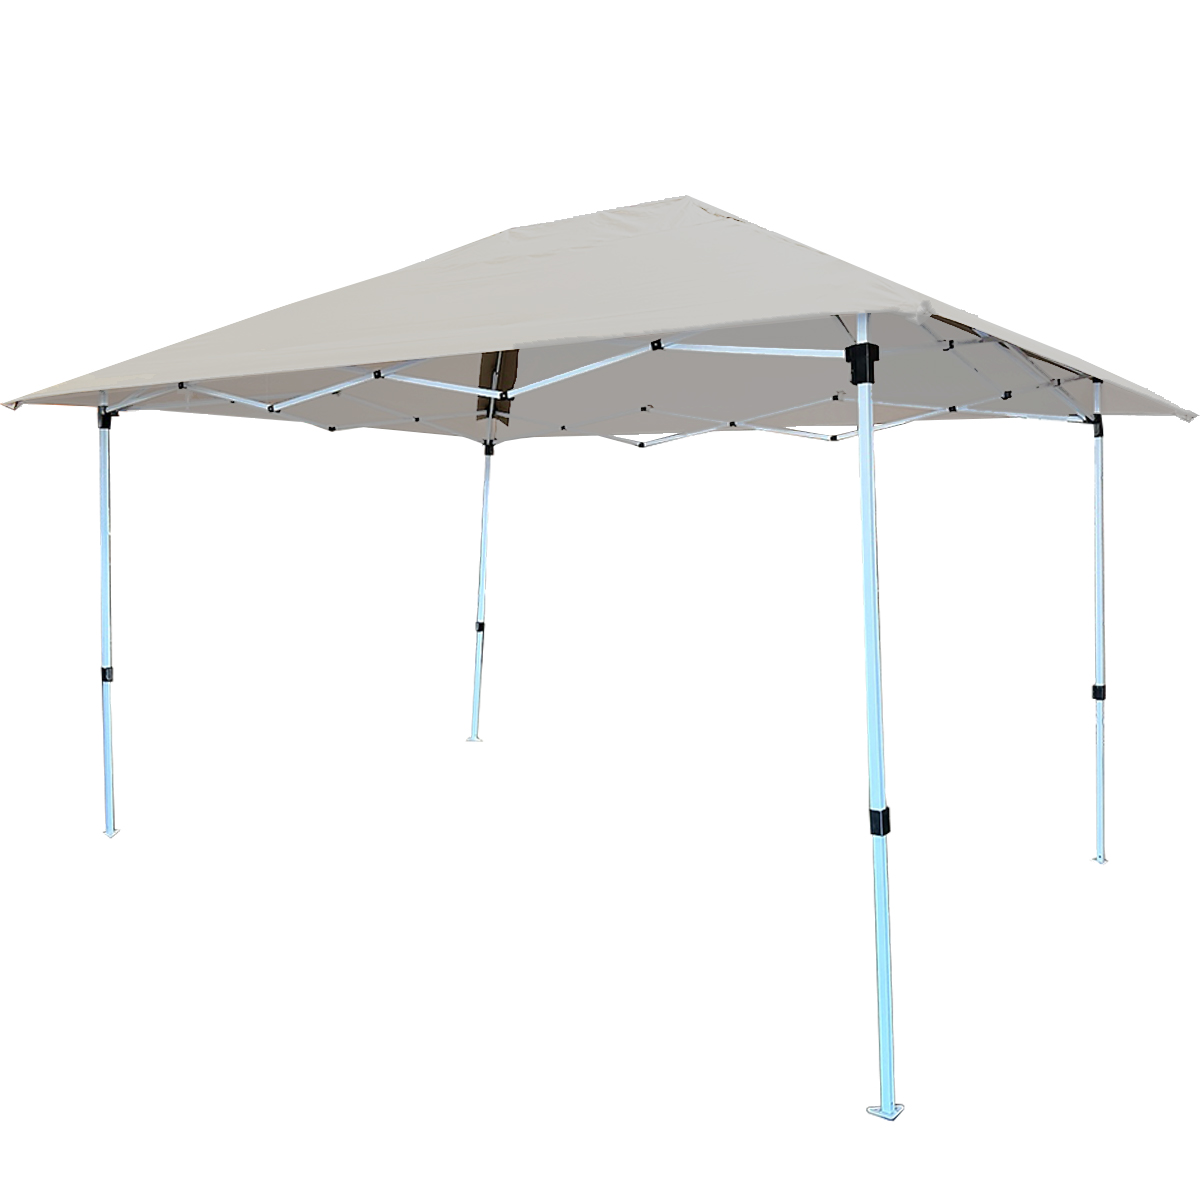 Replacement Canopy for Z-Shade 14x10 Prestige Shelter Tent